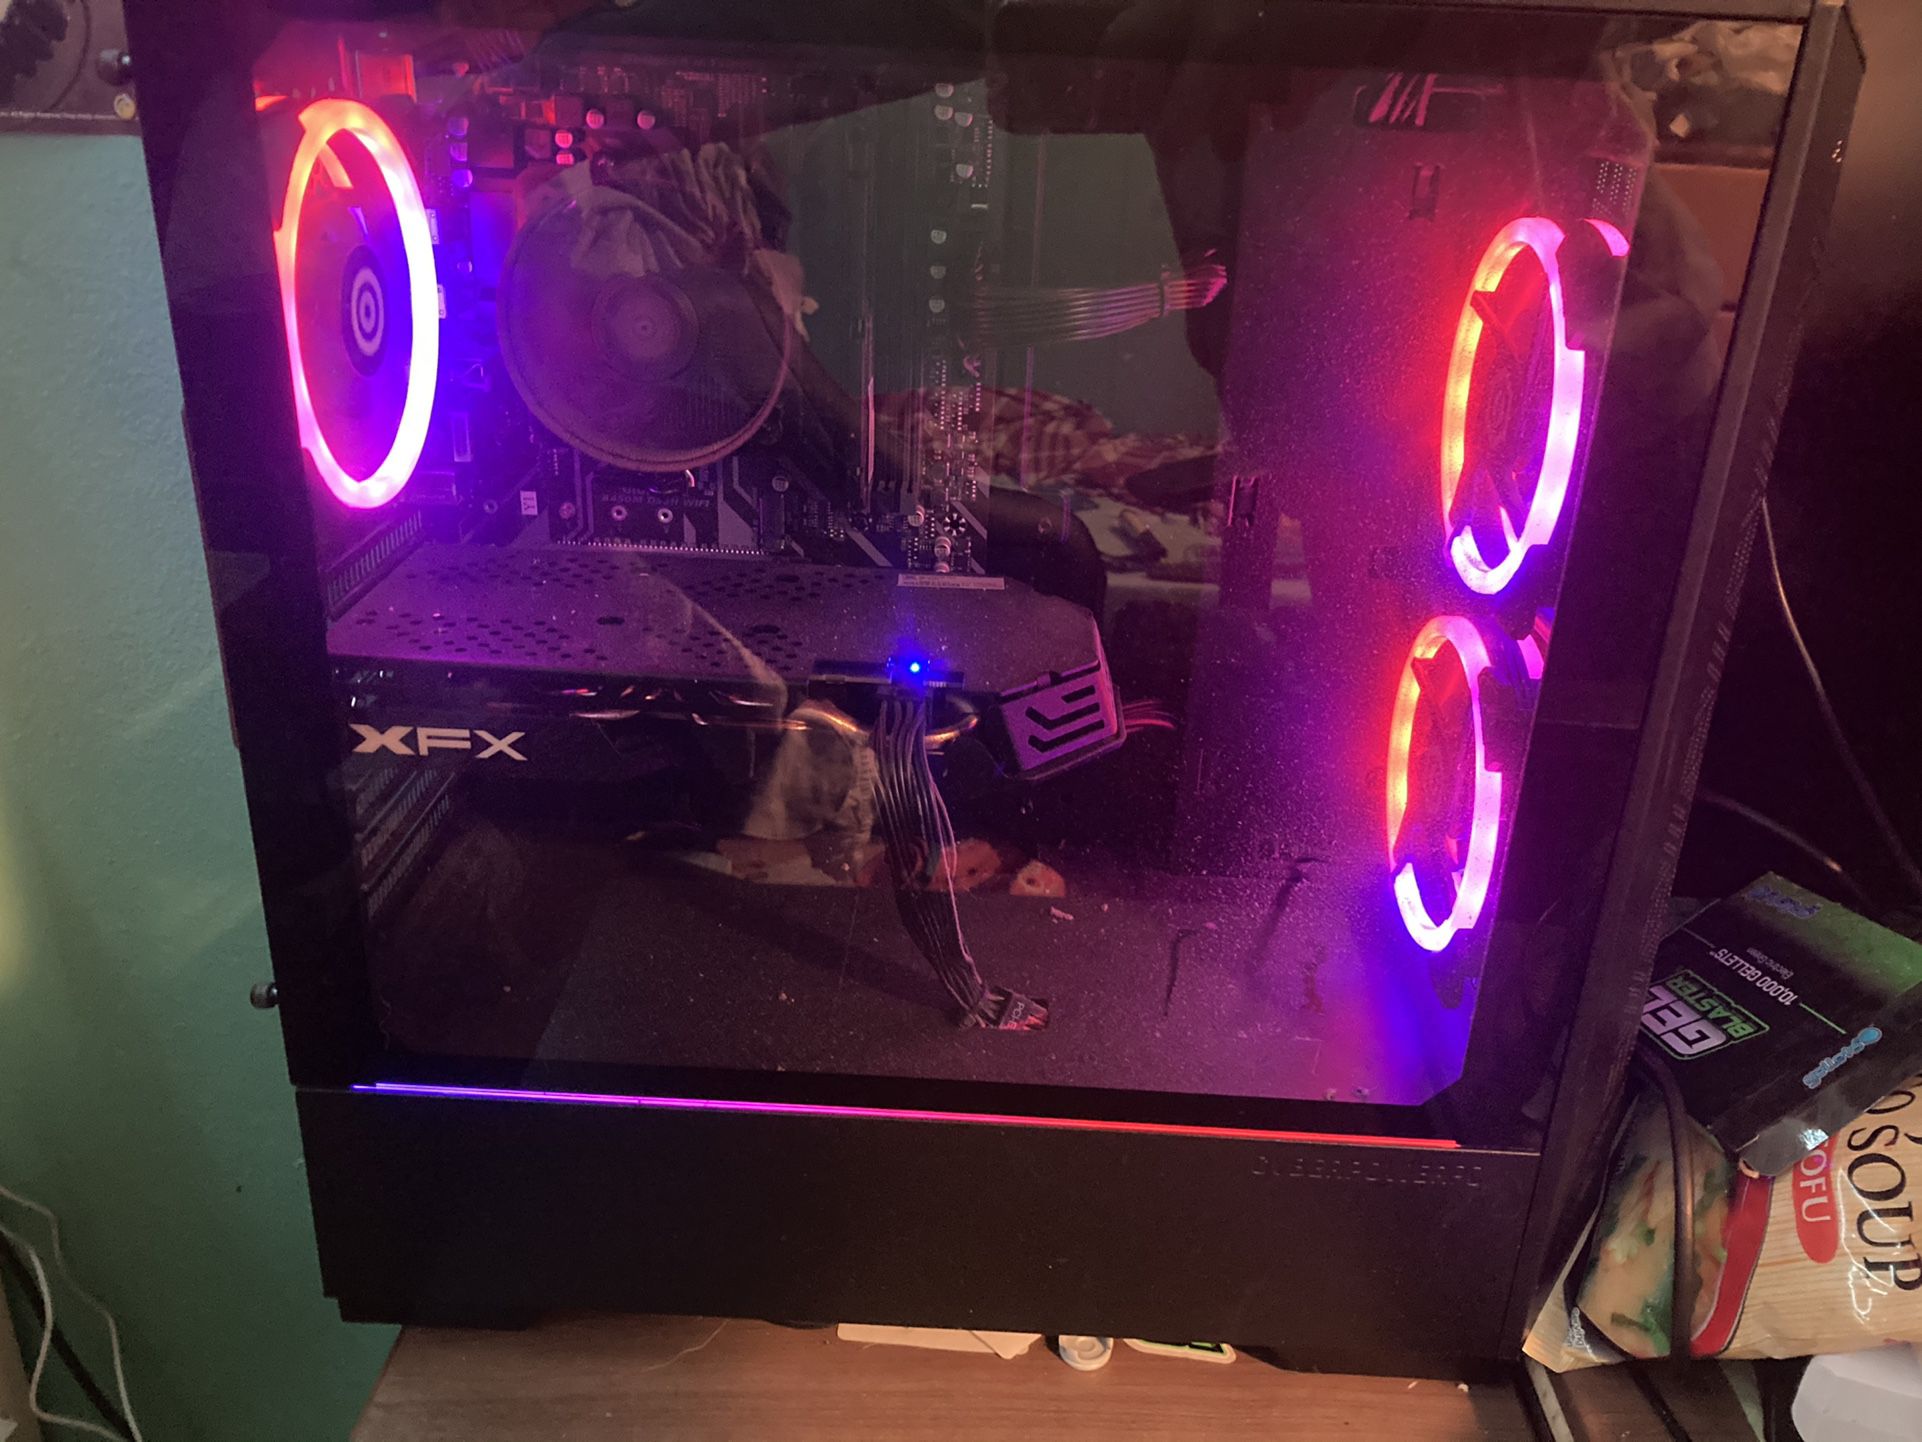 cyberpower-pc-for-sale-in-renton-wa-offerup